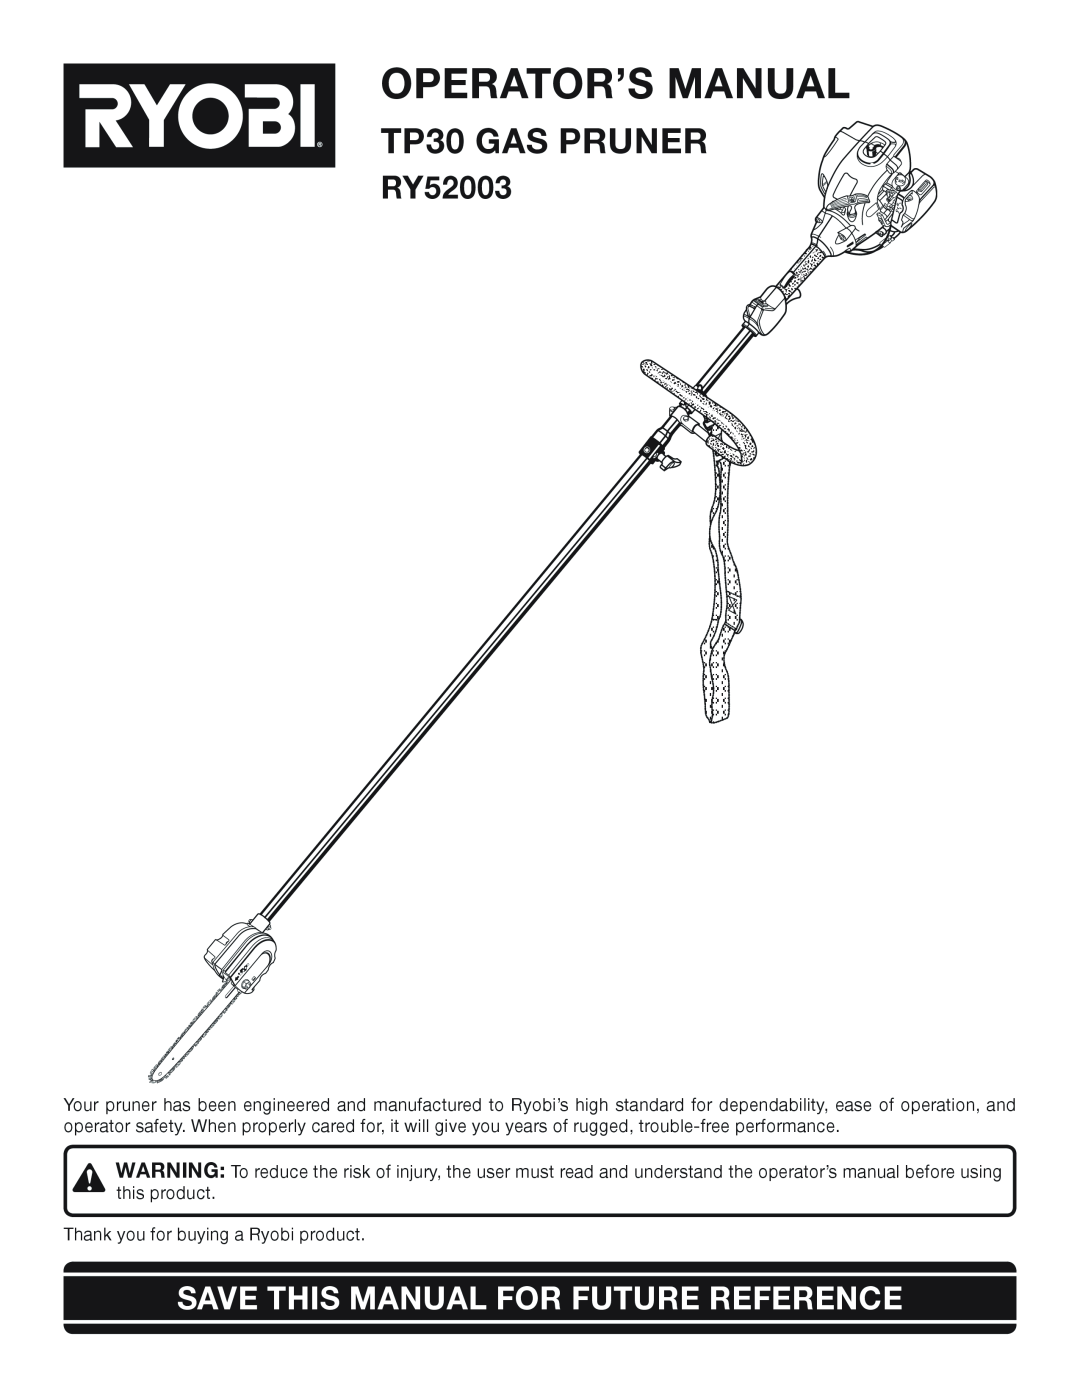 Ryobi RY52003 manual Operator’S Manual, TP30 GAS PRUNER, Save This Manual For Future Reference 